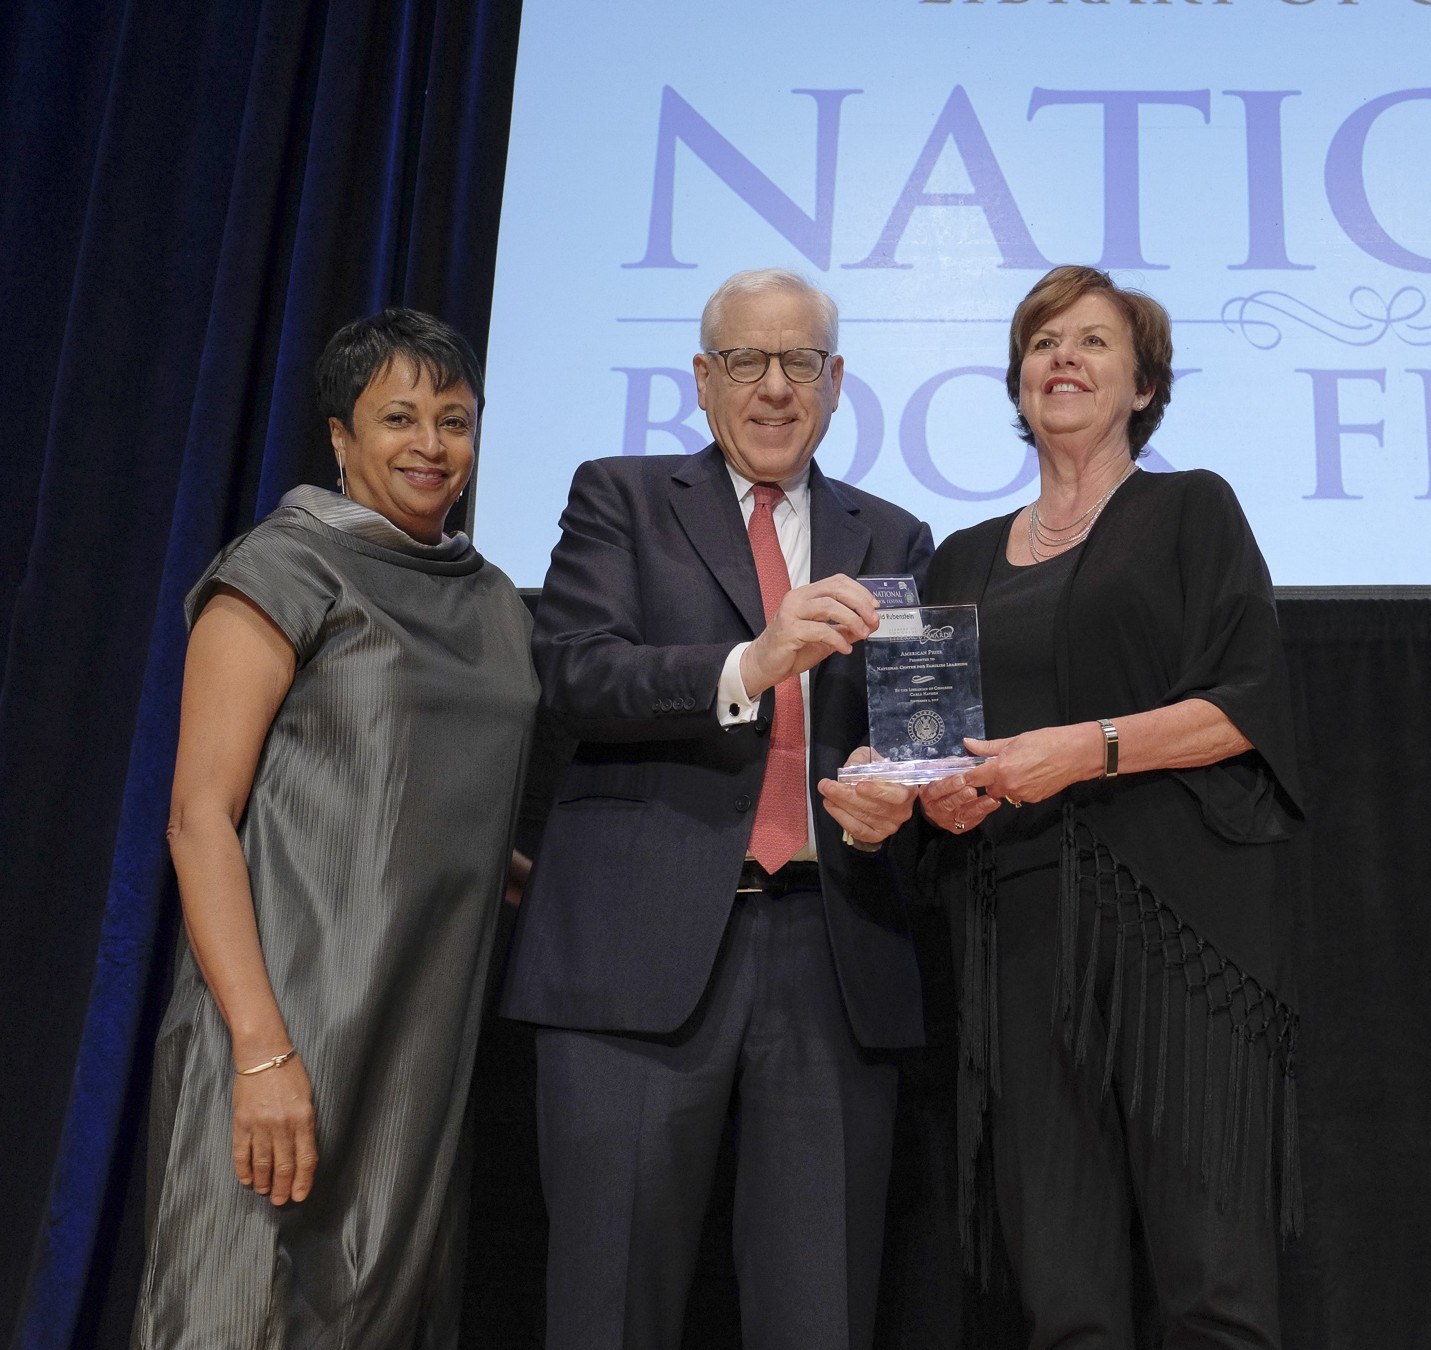 Librarian of Congress Carla Hayden and Literacy Awards benefactor David Rubenstein award the 2017 American Prize to the National Center for Families Learning from Louisville, Kentucky, during the National Book Festival Gala, September 1, 2017. Photo by Shawn Miller.